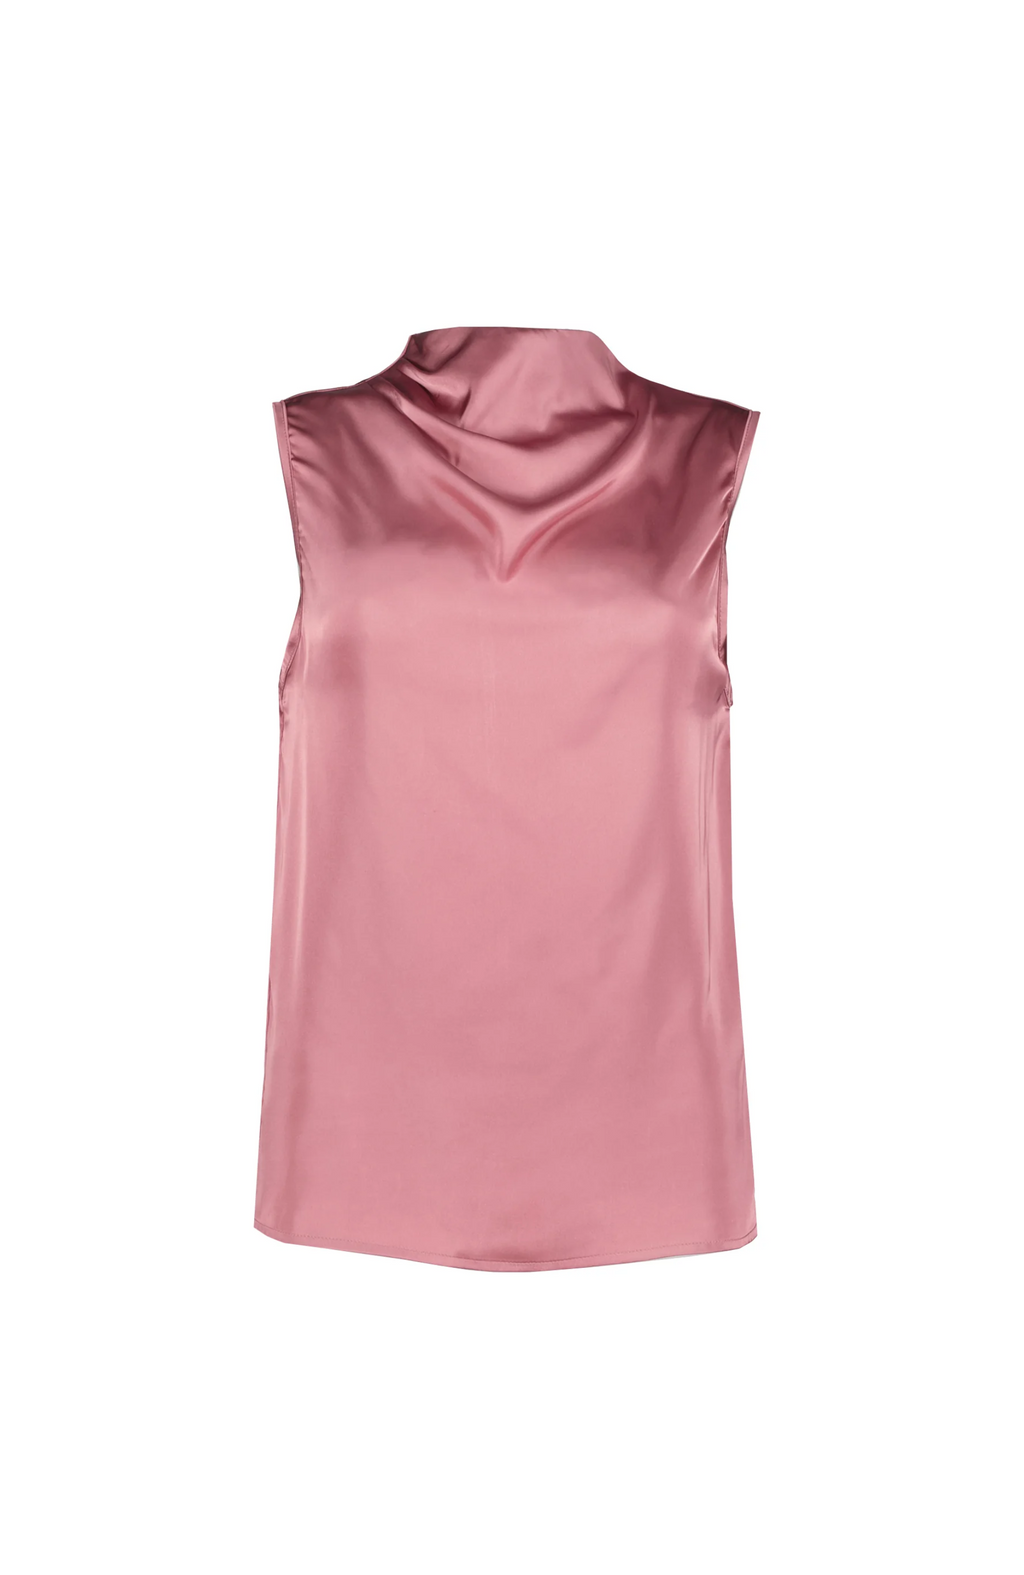 Bishop & Young - Silky Cowl Neck Top